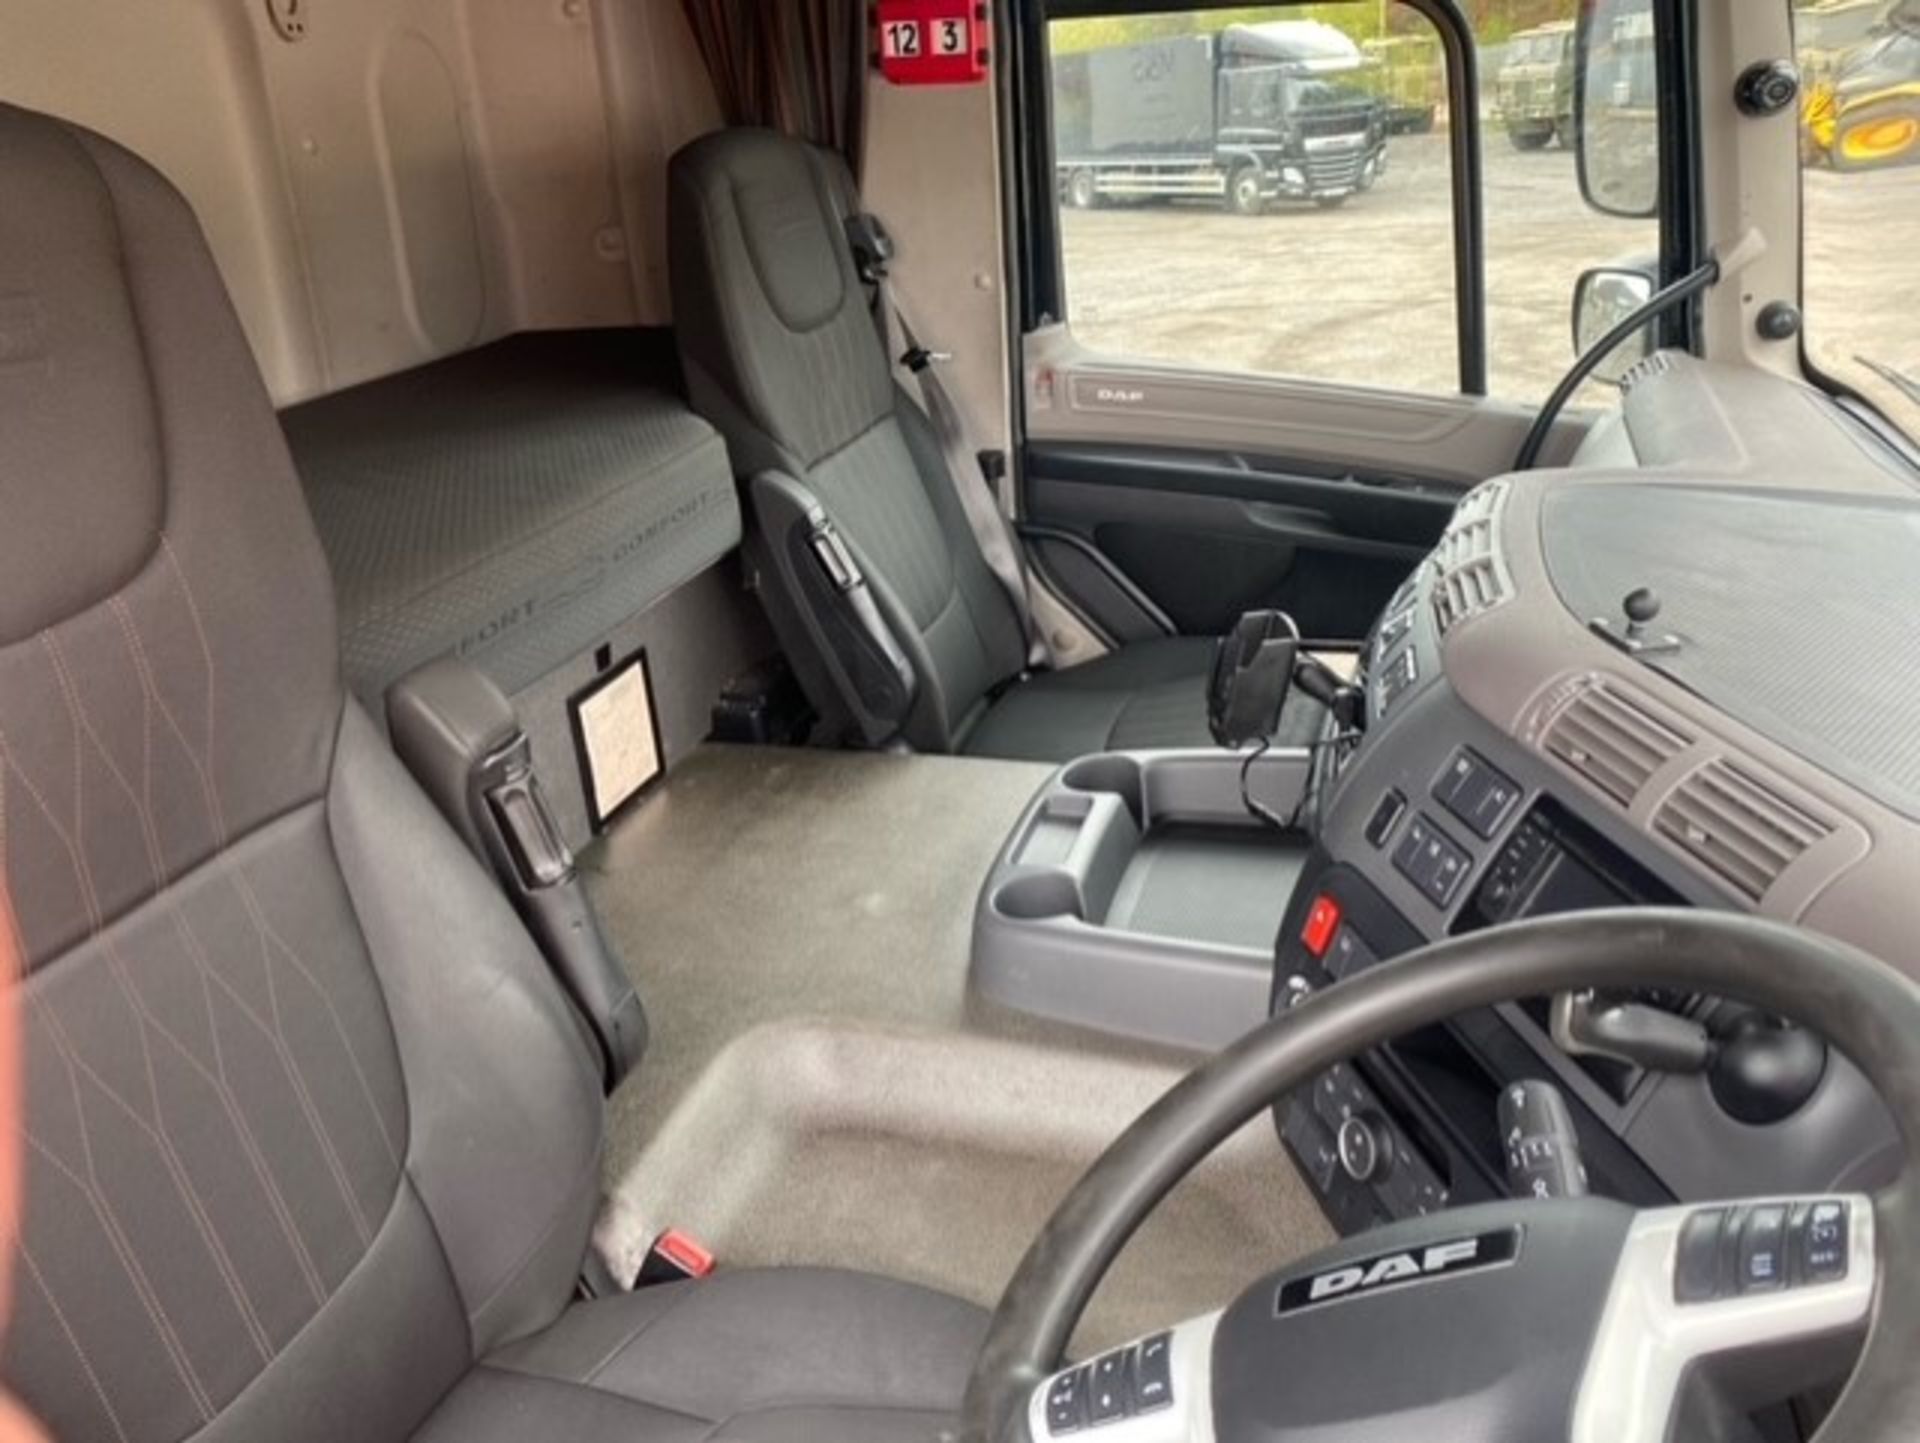 2019, DAF CF 260 FA (Ex-Fleet Owned & Maintained) - FN69 AXH (18 Ton Rigid Truck with Tail Lift) - Bild 15 aus 22